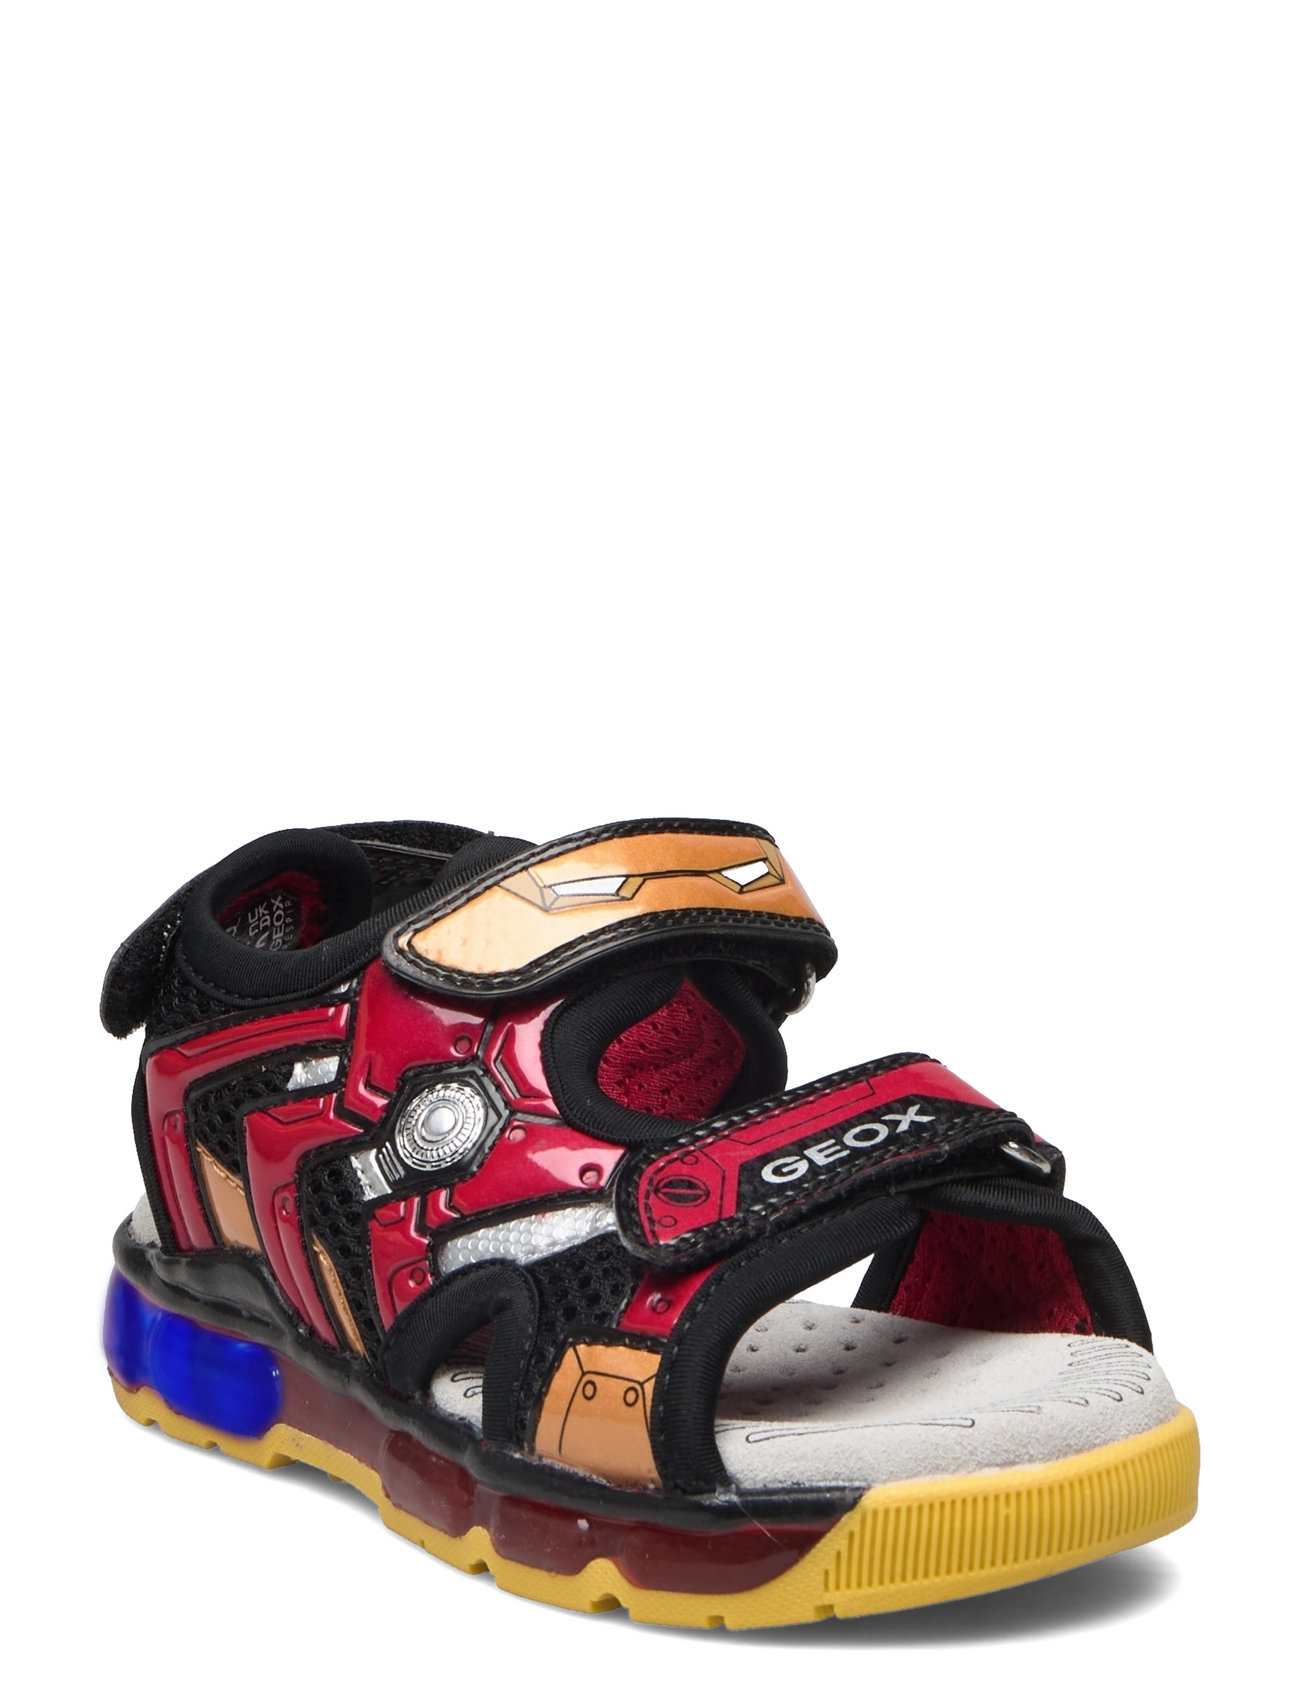 GEOX J Sandal Android Boy (Black kr) Large selection of outlet-styles | Booztlet.com